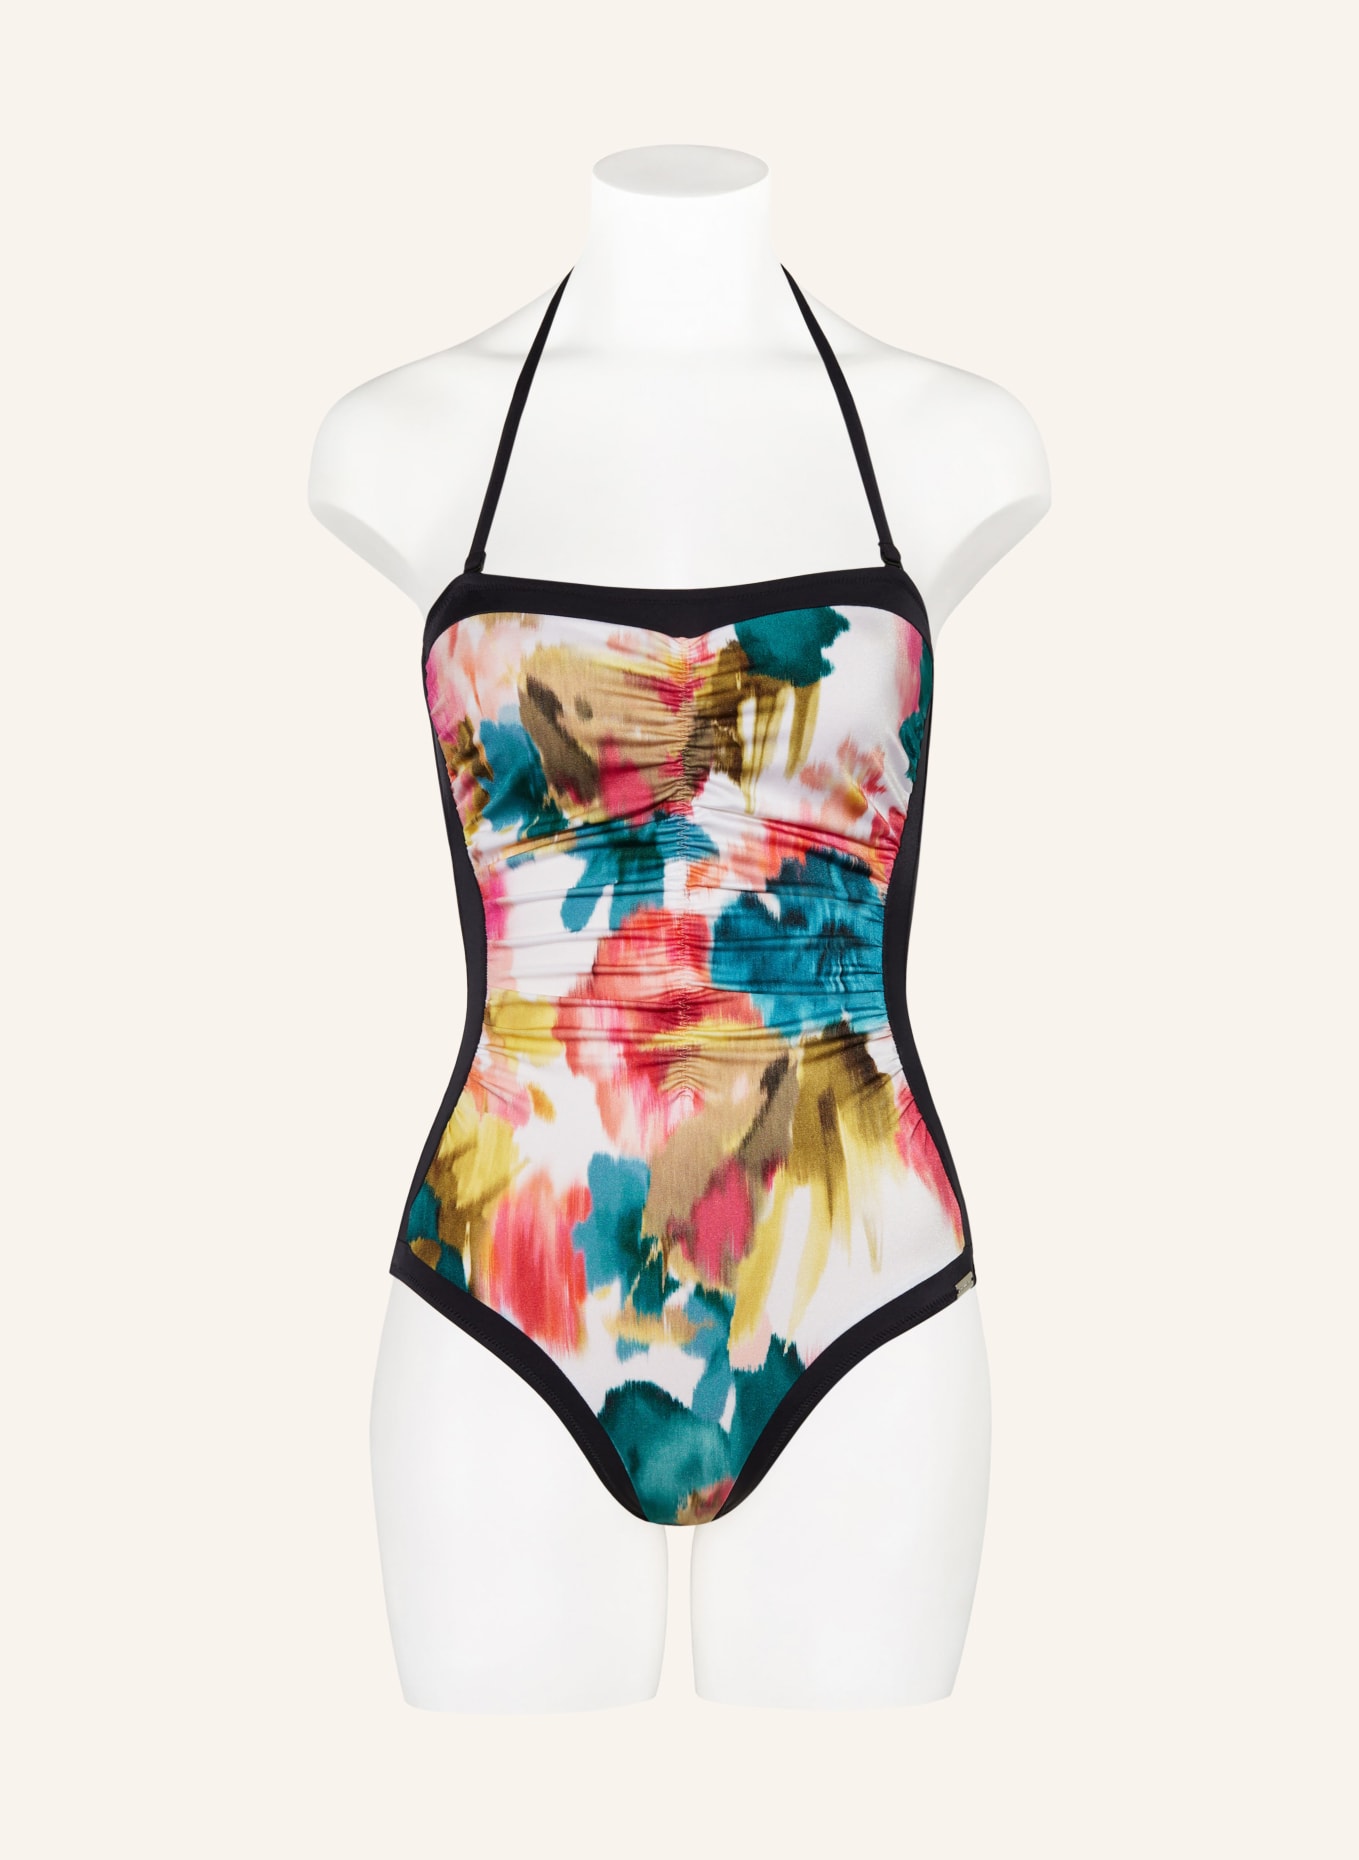 Charmline Shaping swimsuit TRUE BLOOM, Color: BLACK/ WHITE/ TEAL (Image 5)